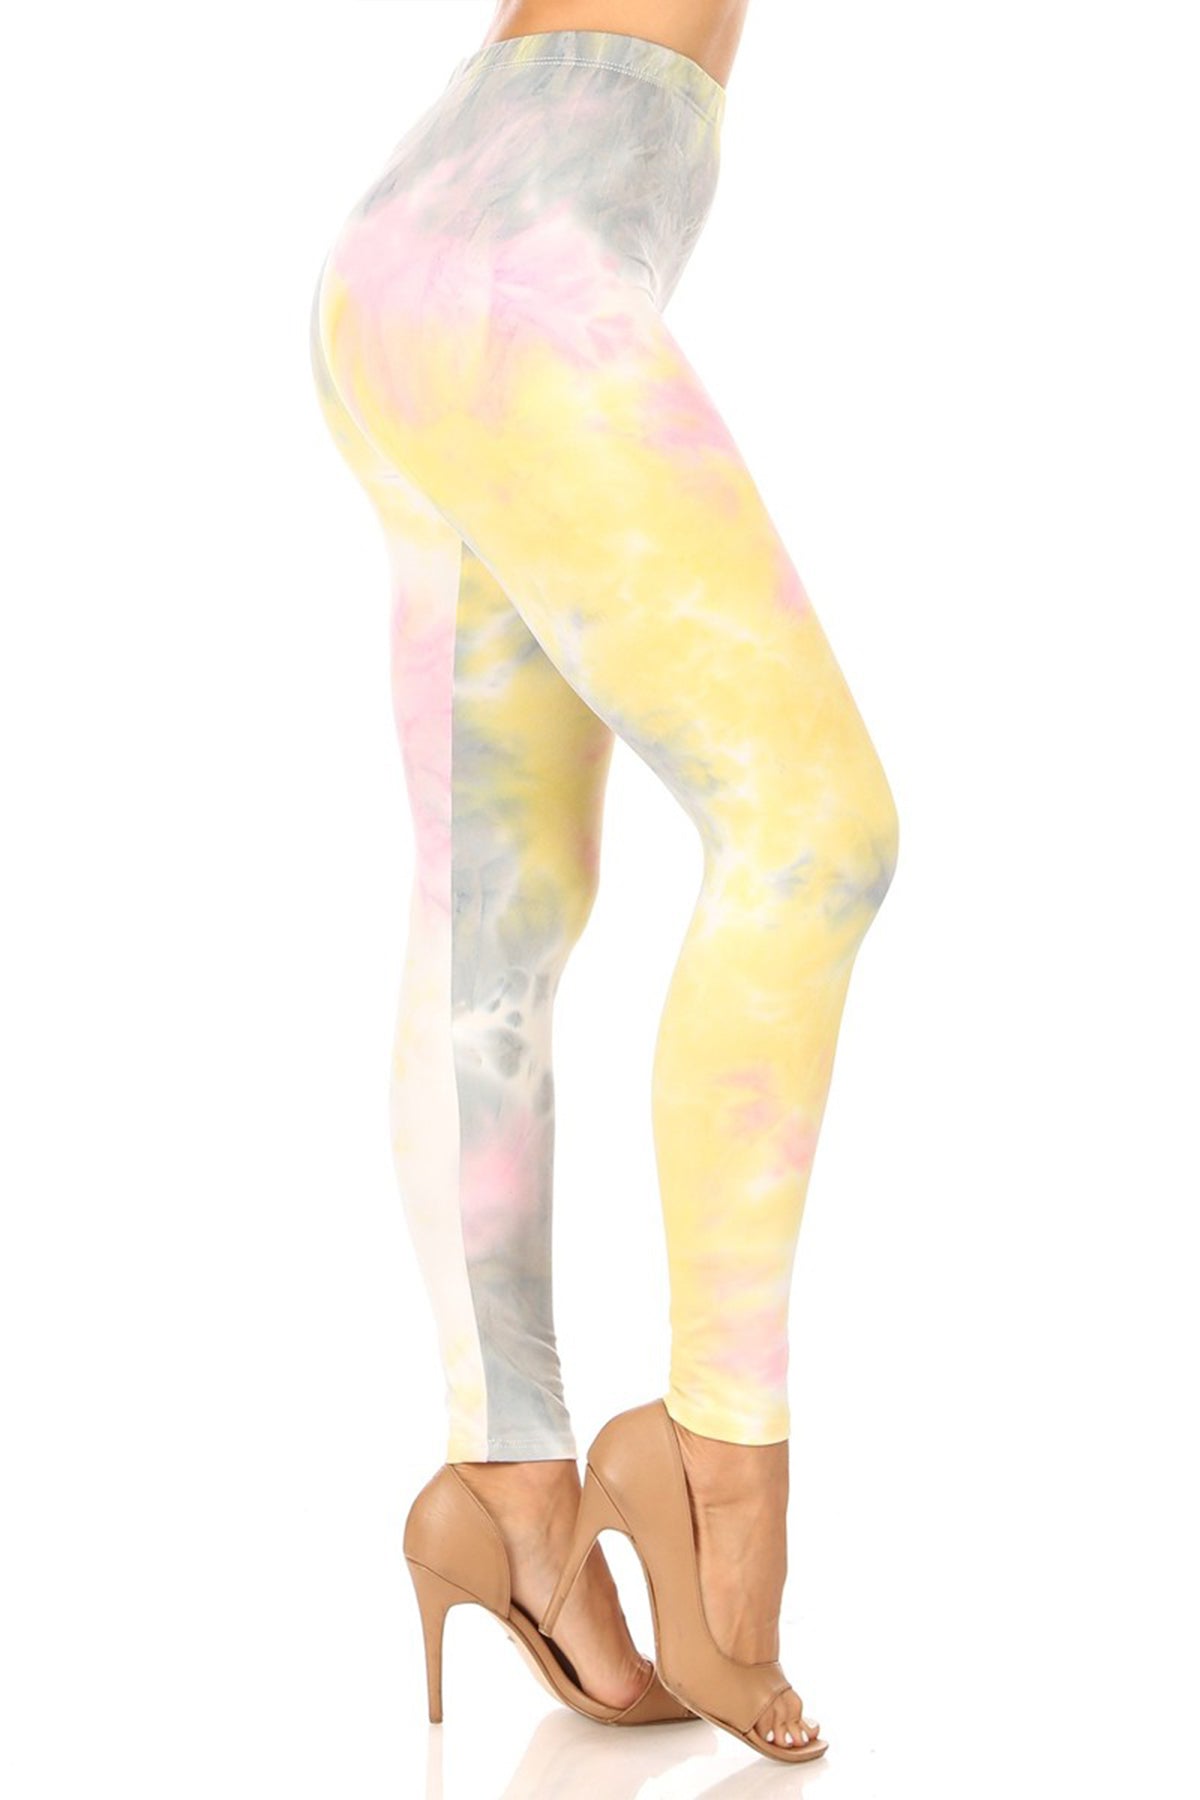 Women's Casual Tie Dye and Solid Color Elastic Band Waist Active Leggings Pants S-3XL